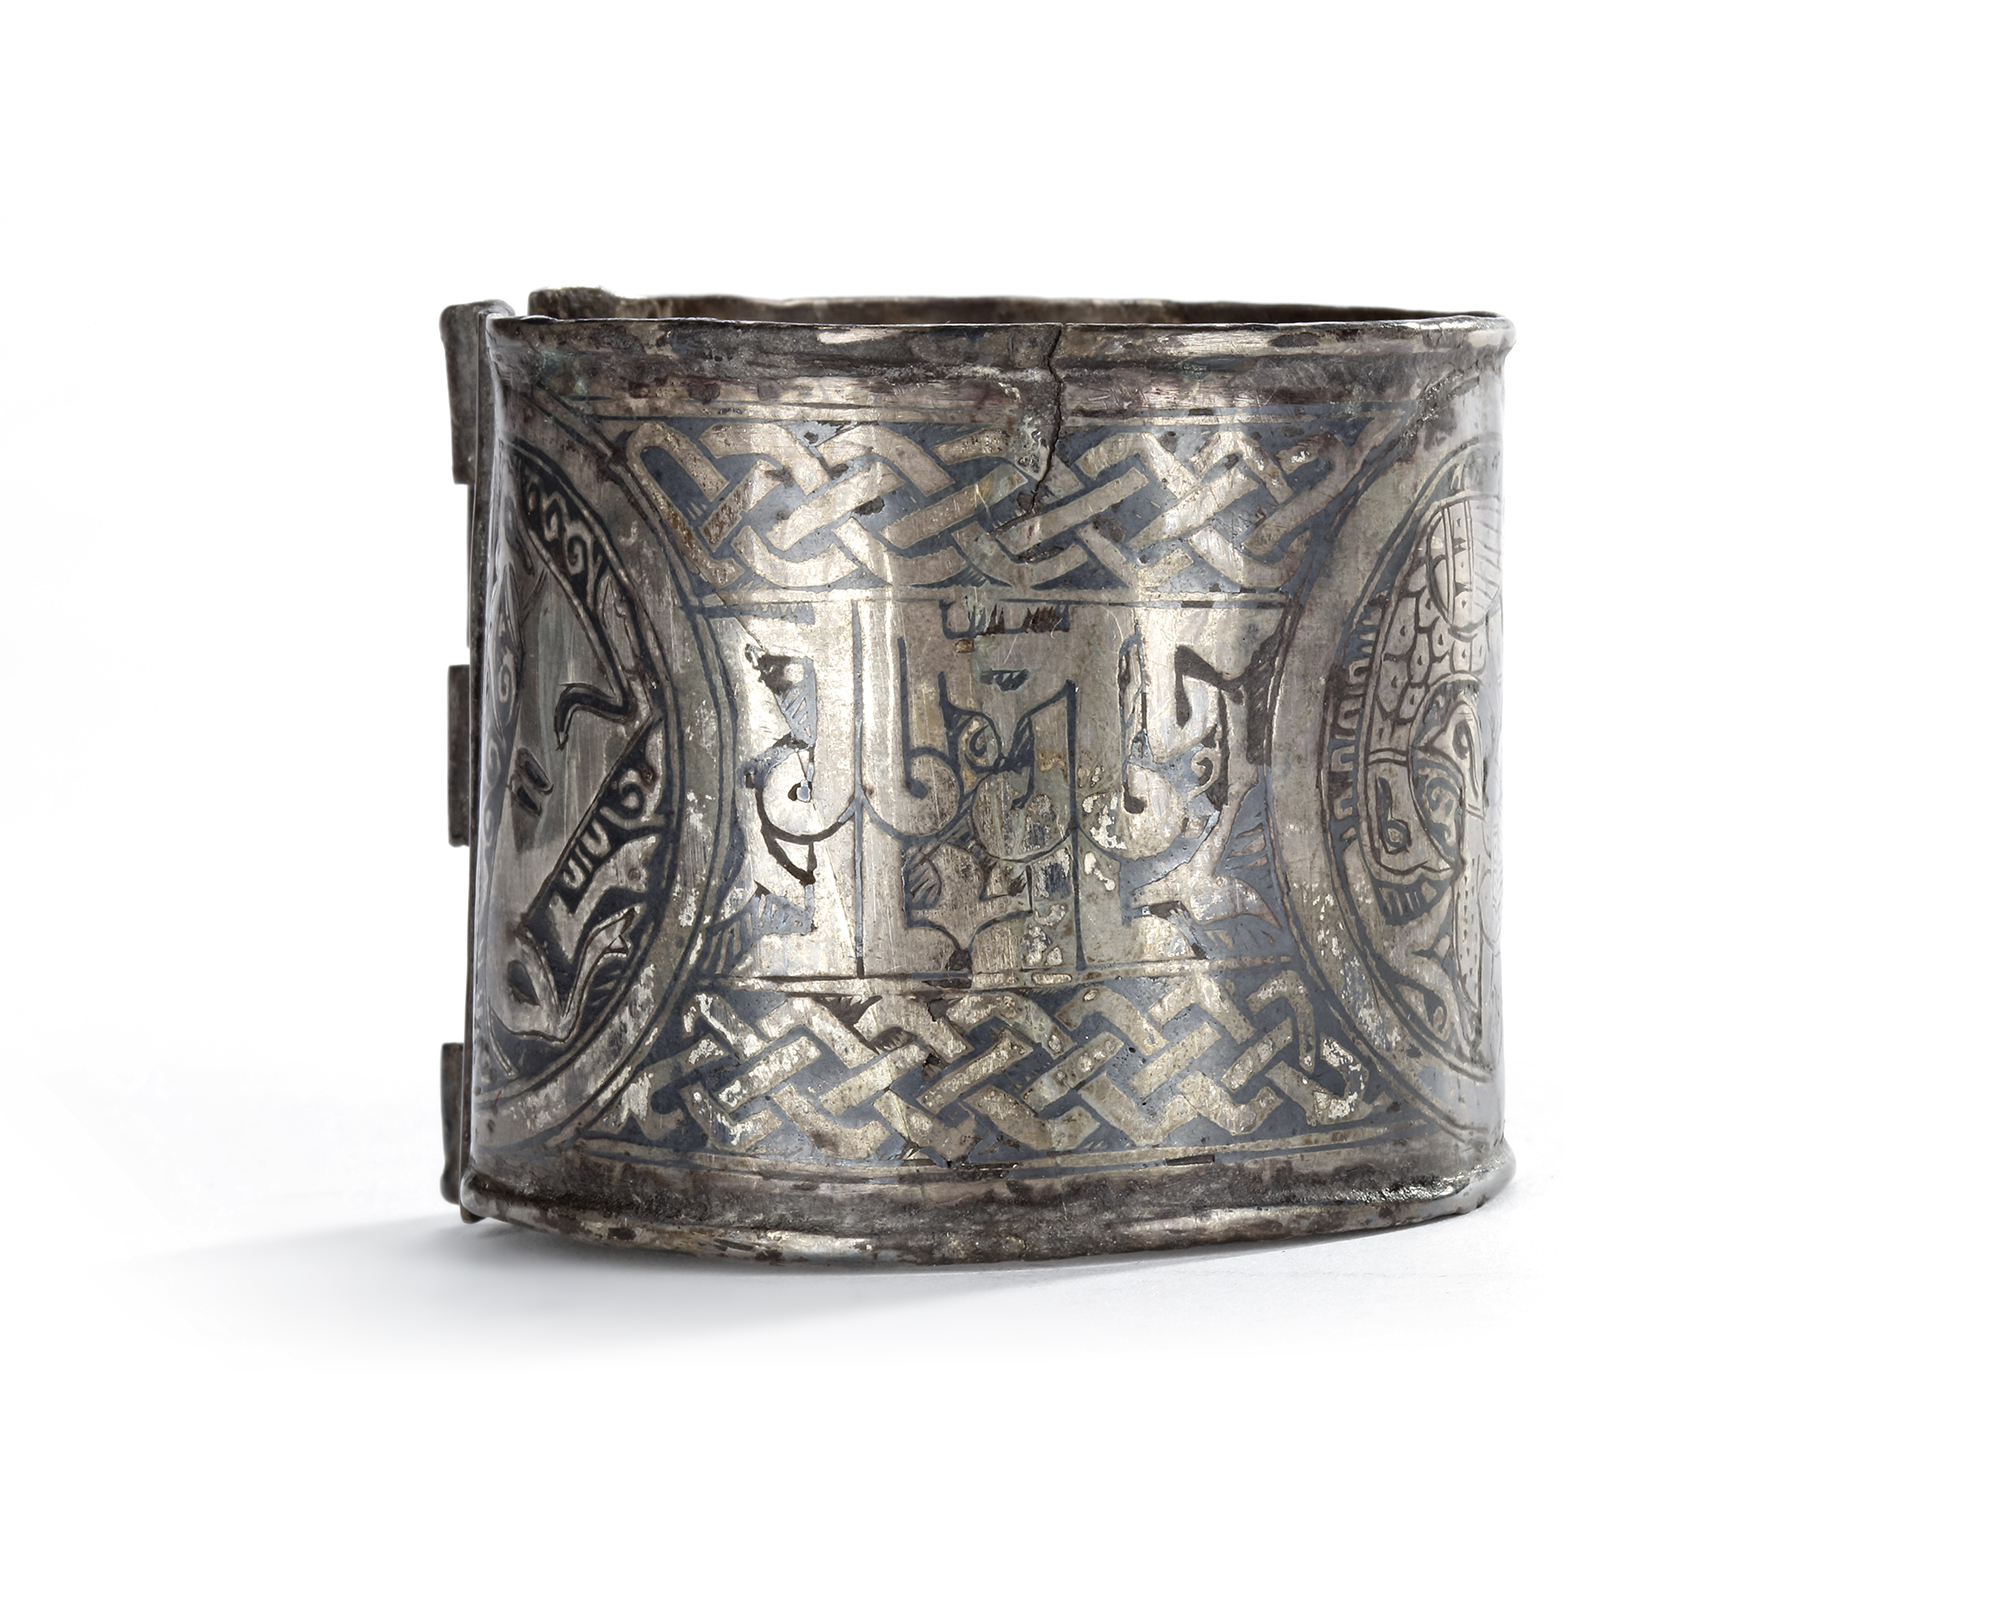 A SILVER AND NIELLO BRACELET WITH KUFIC INSCRIPTION, 11TH-12TH CENTURY - Image 4 of 6